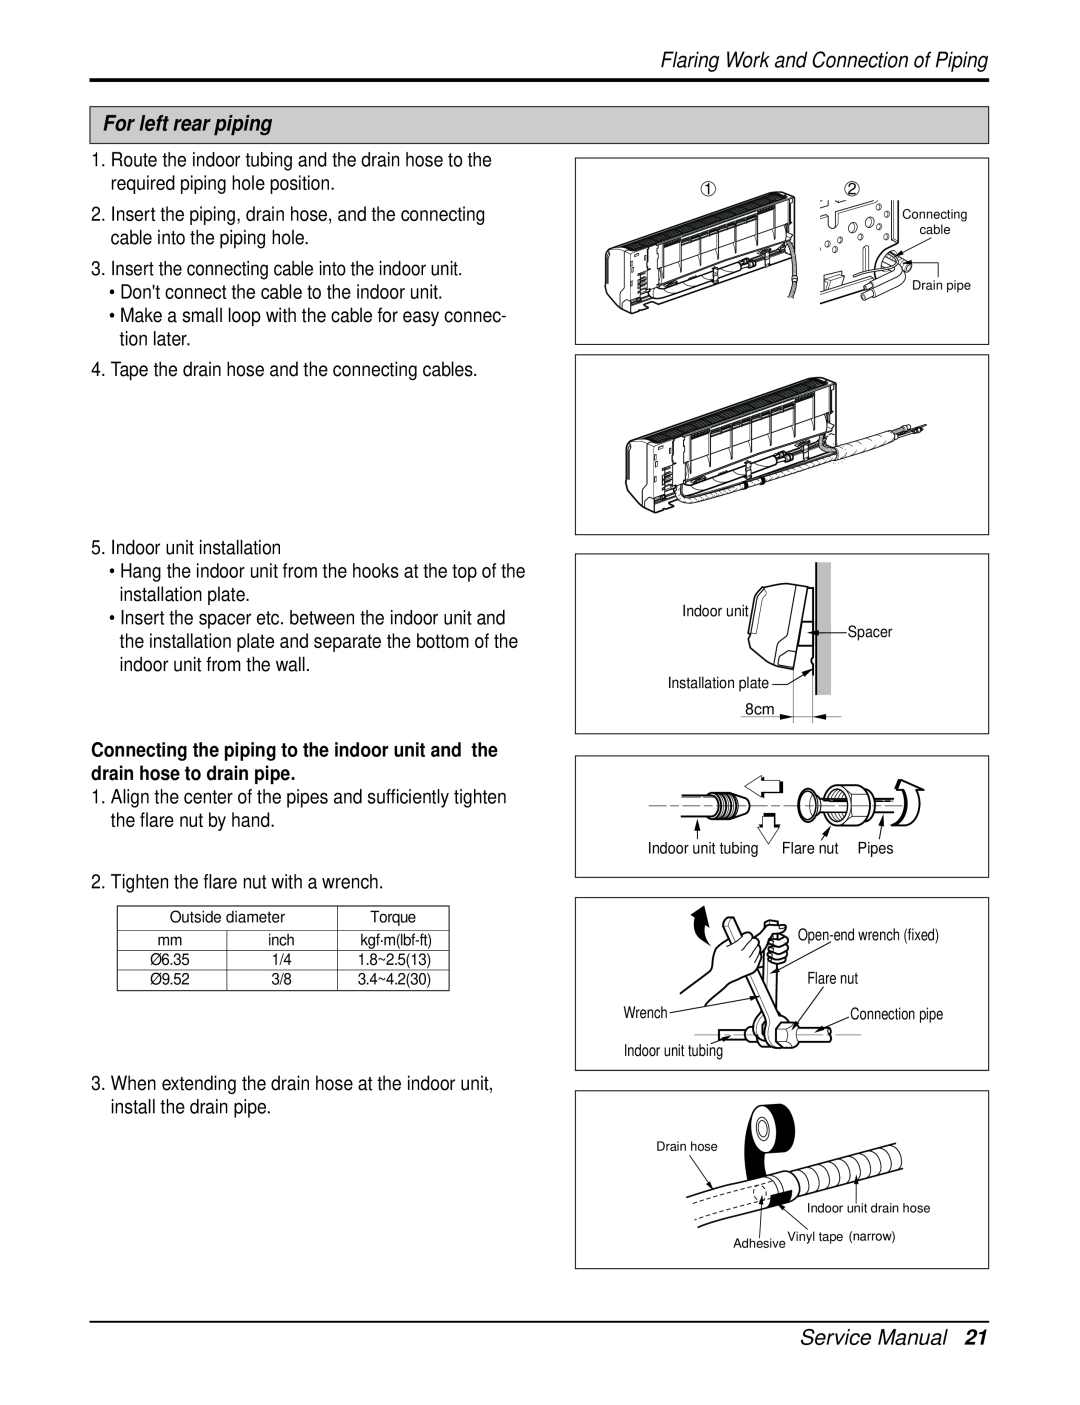 Heat Controller DMH18DB-1 manual For left rear piping, Flaring Work and Connection of Piping, Service Manual 